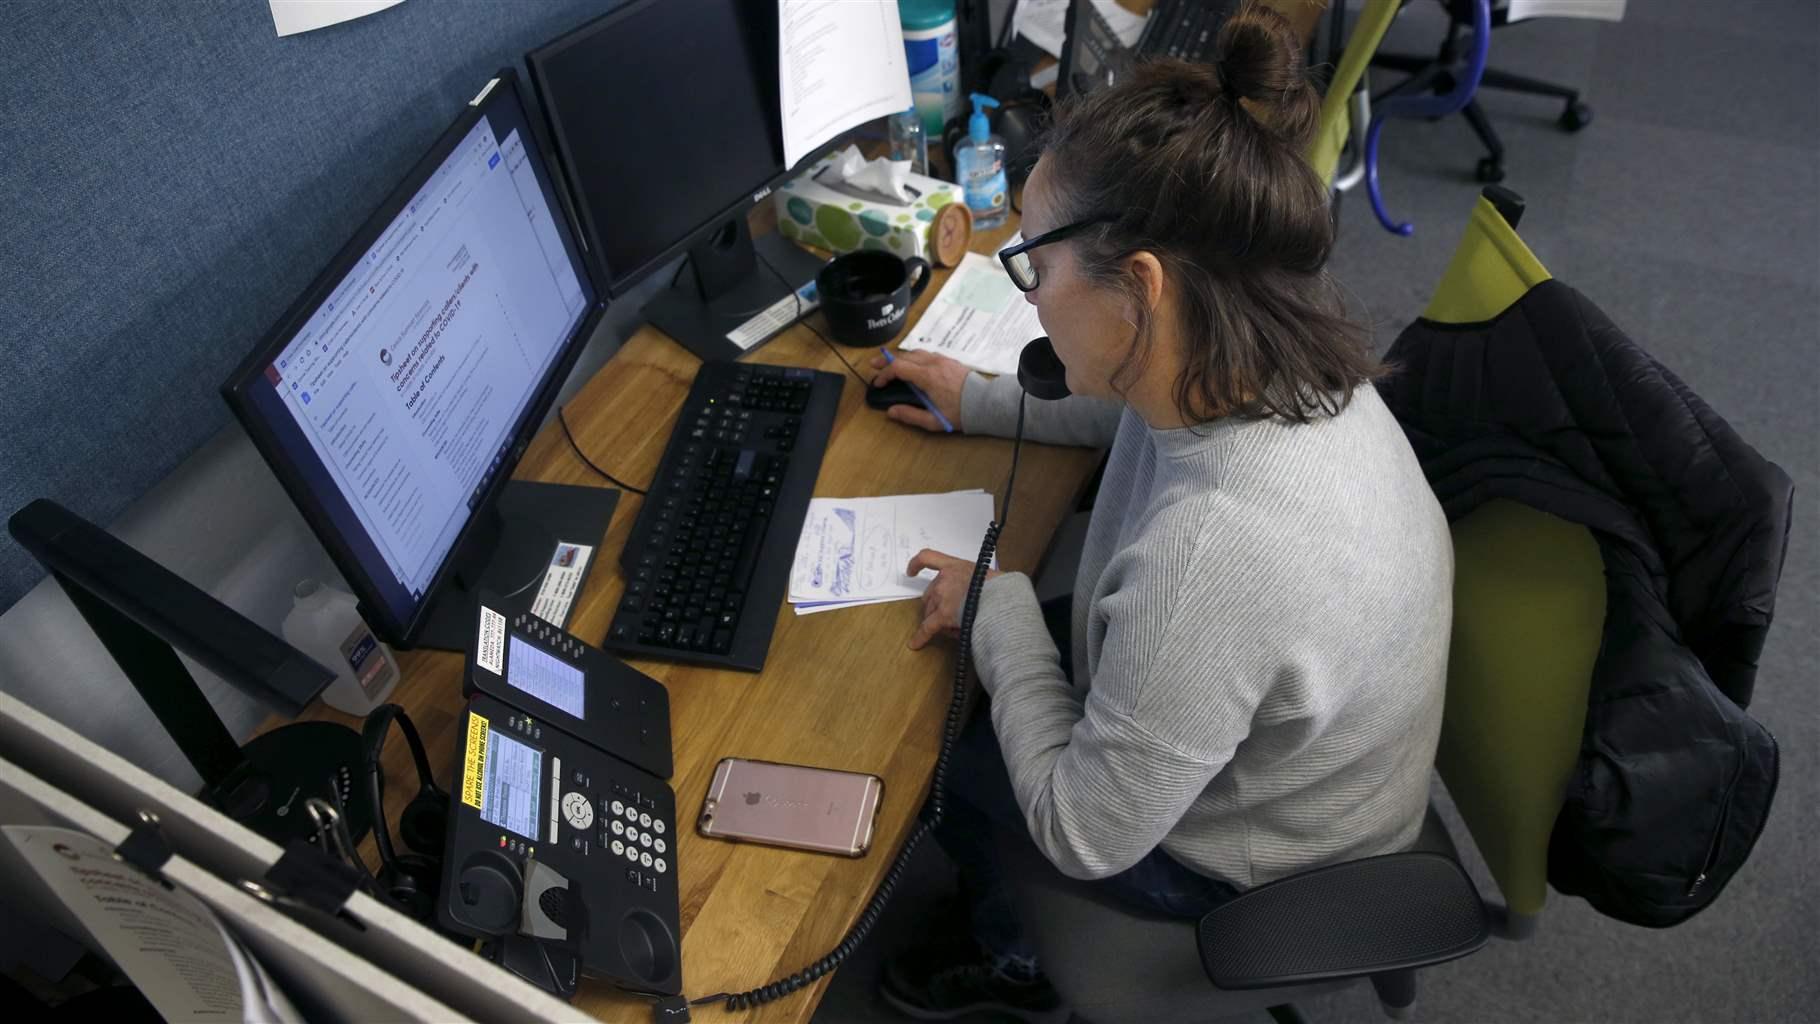 A person sitting in front of a computer in an office talks on the telephone and tracks notes on papers on the desk. 